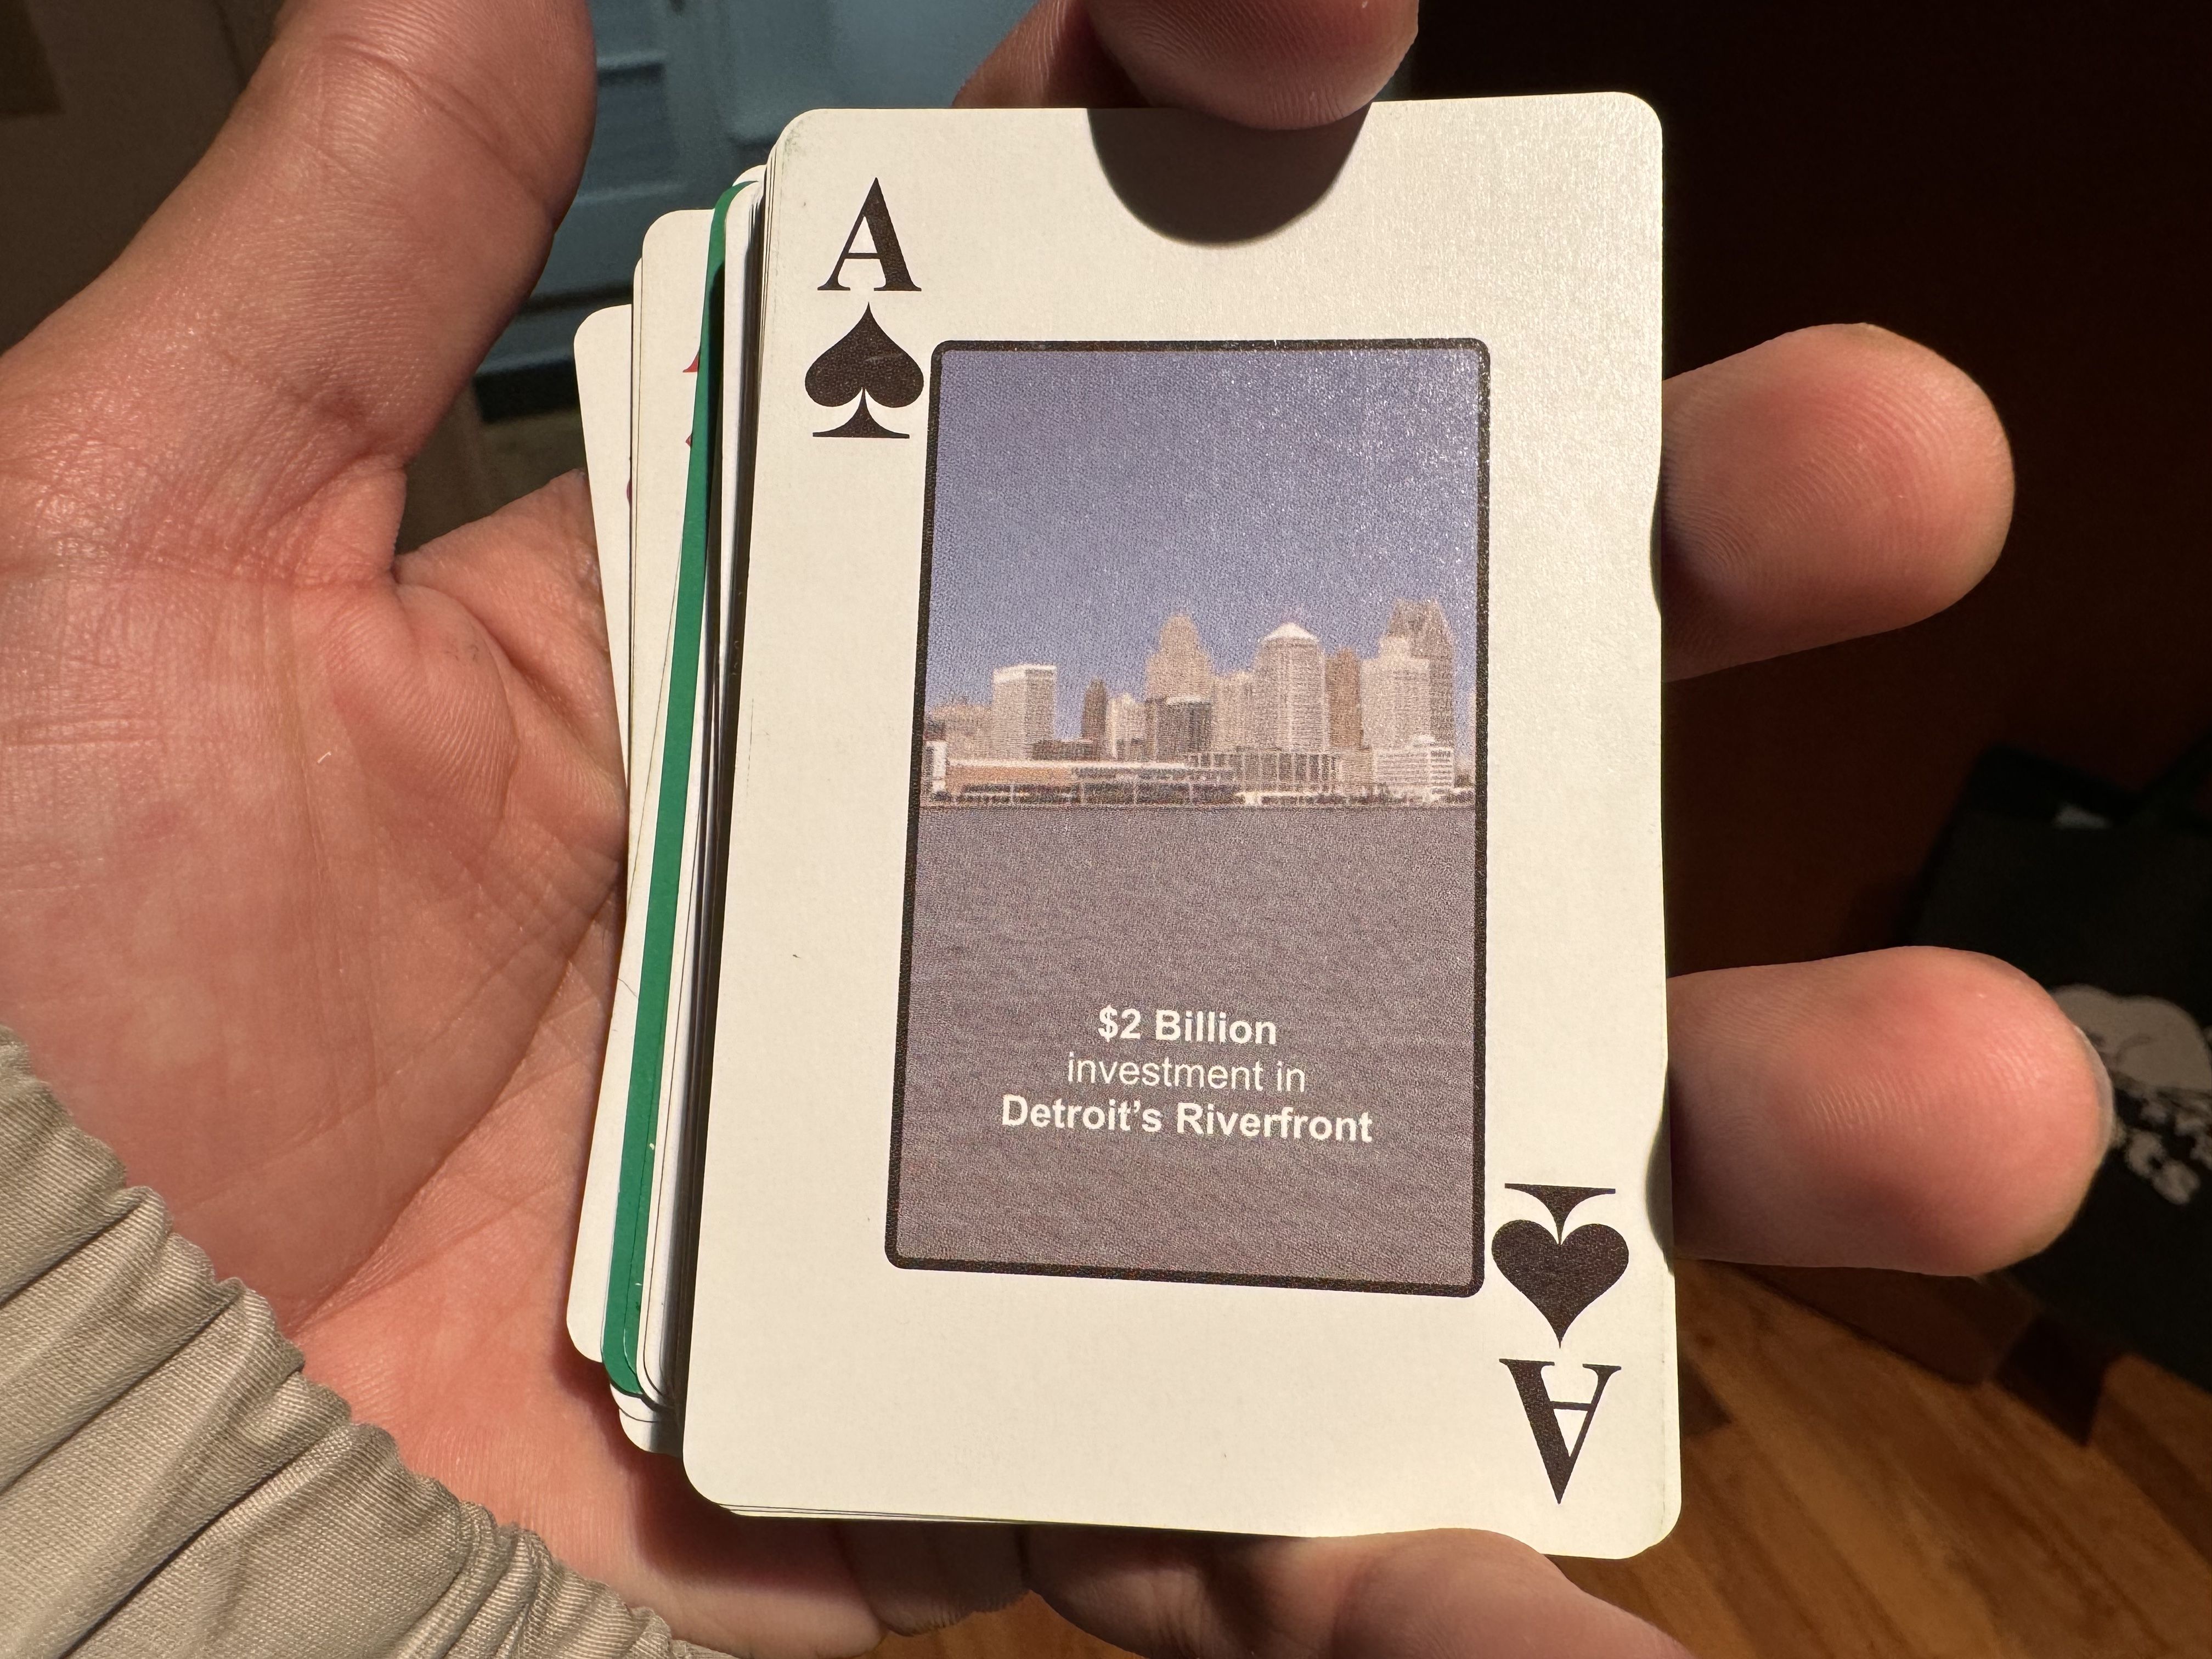 Some cards highlight accomplishments like this one of a $2 billion riverfront investment.